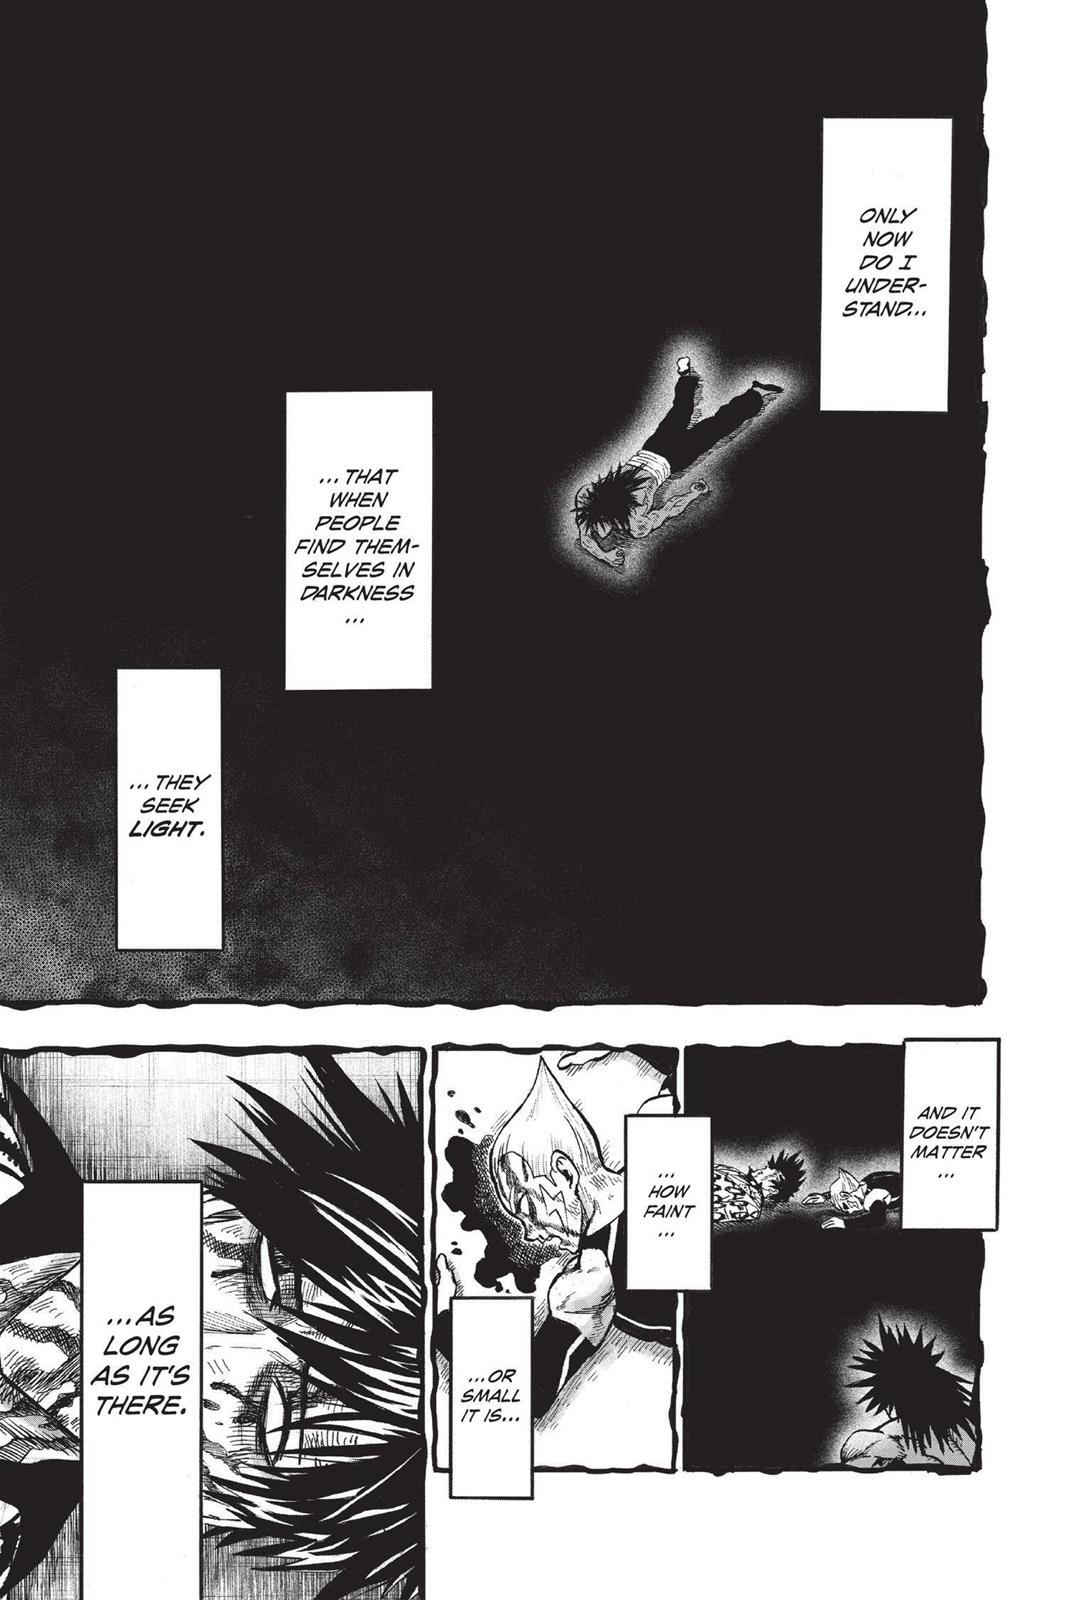 One-Punch Man, Punch 74 image 36